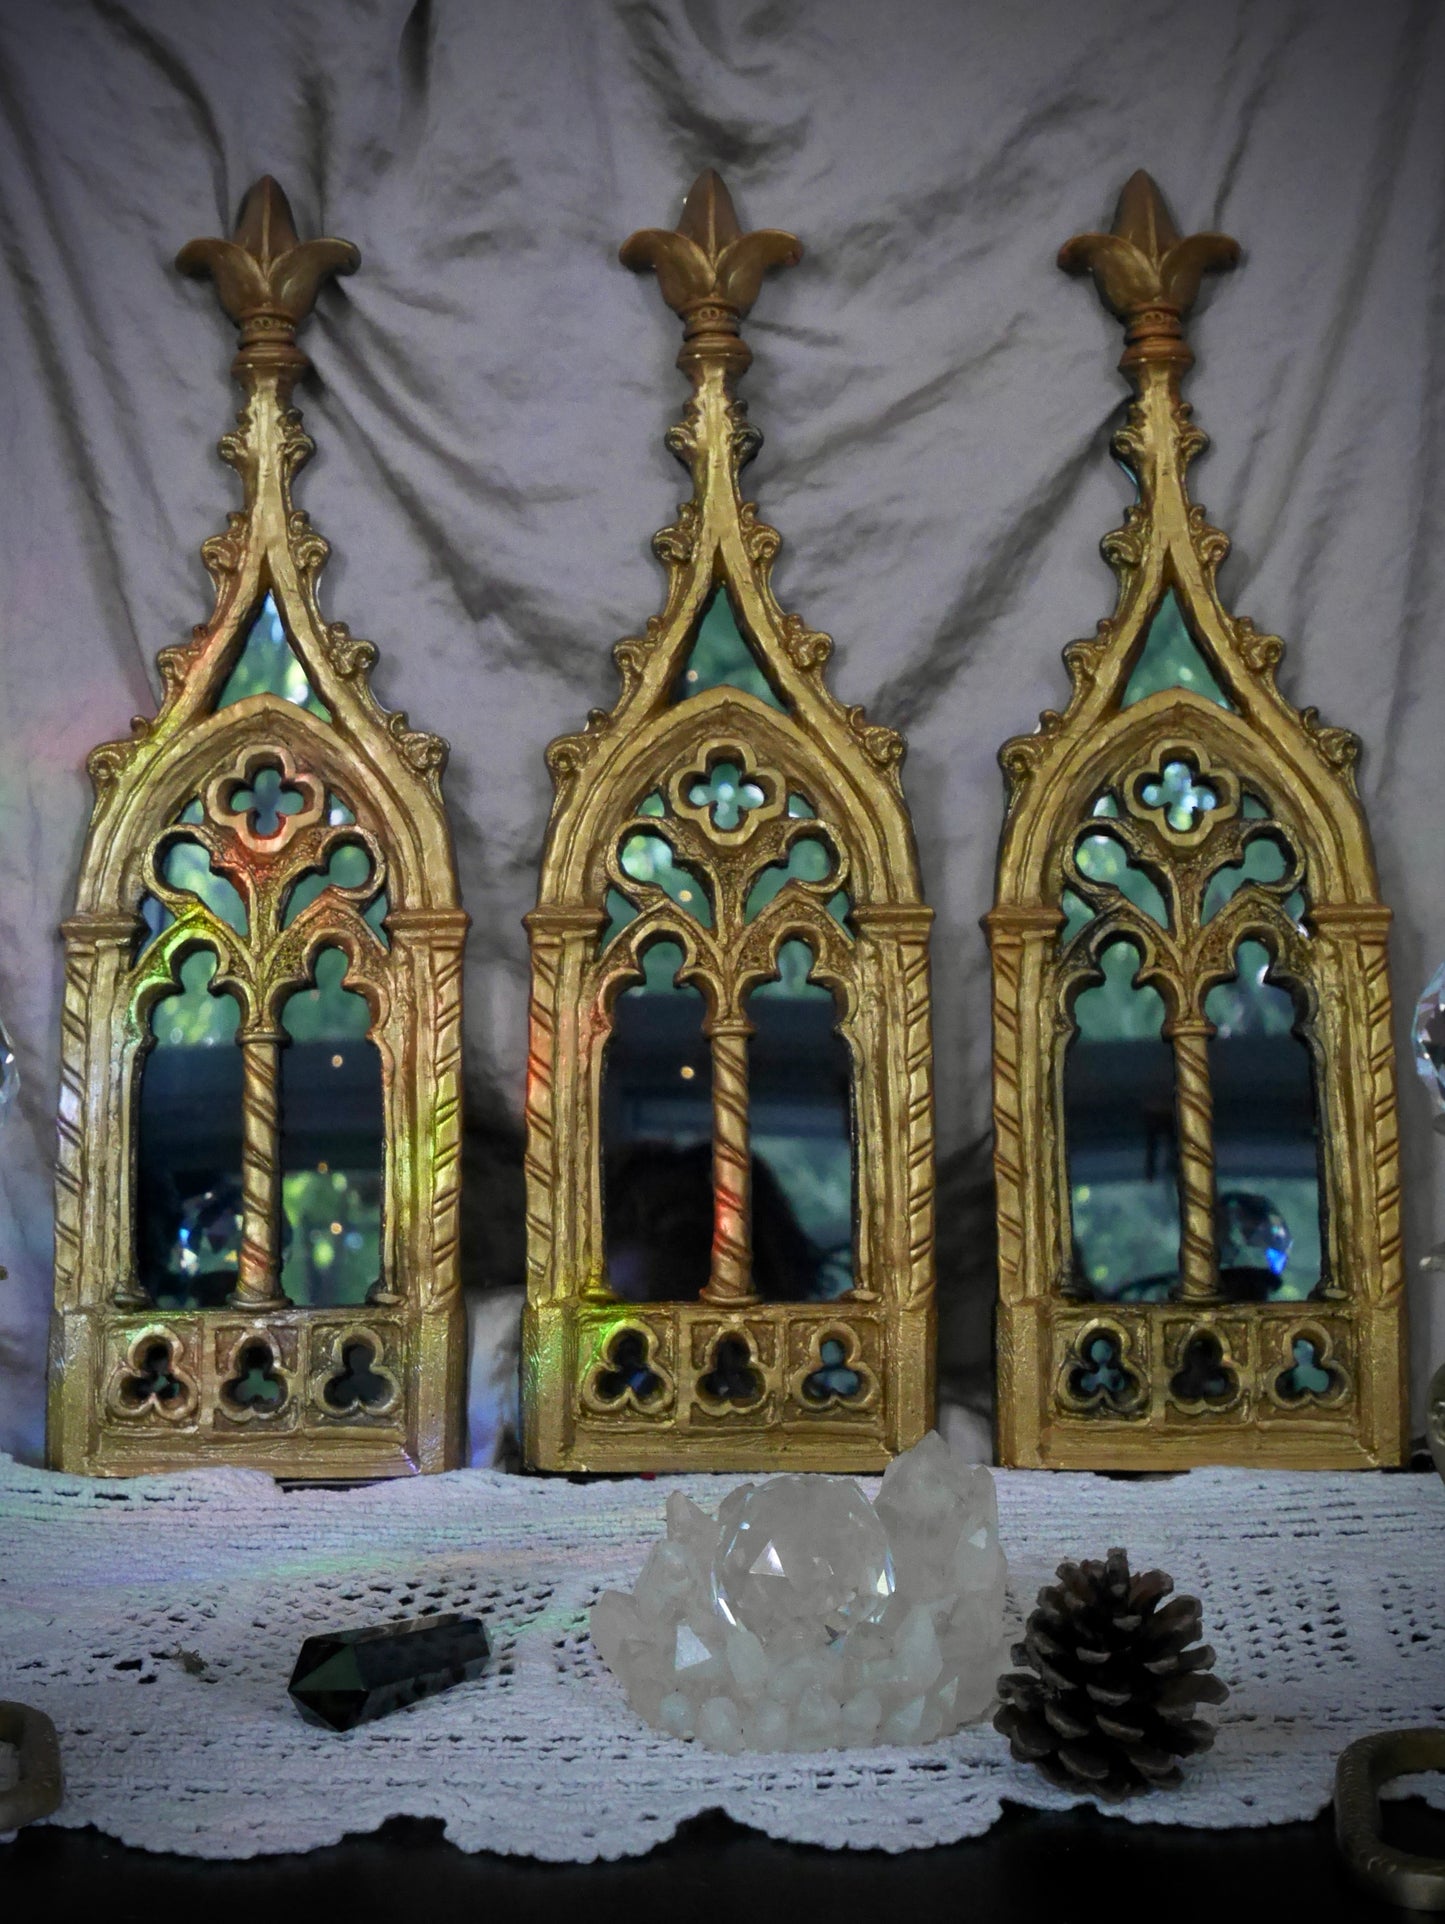 Gothic Spires - Gold and Black Acrylic Mirror - PREORDER